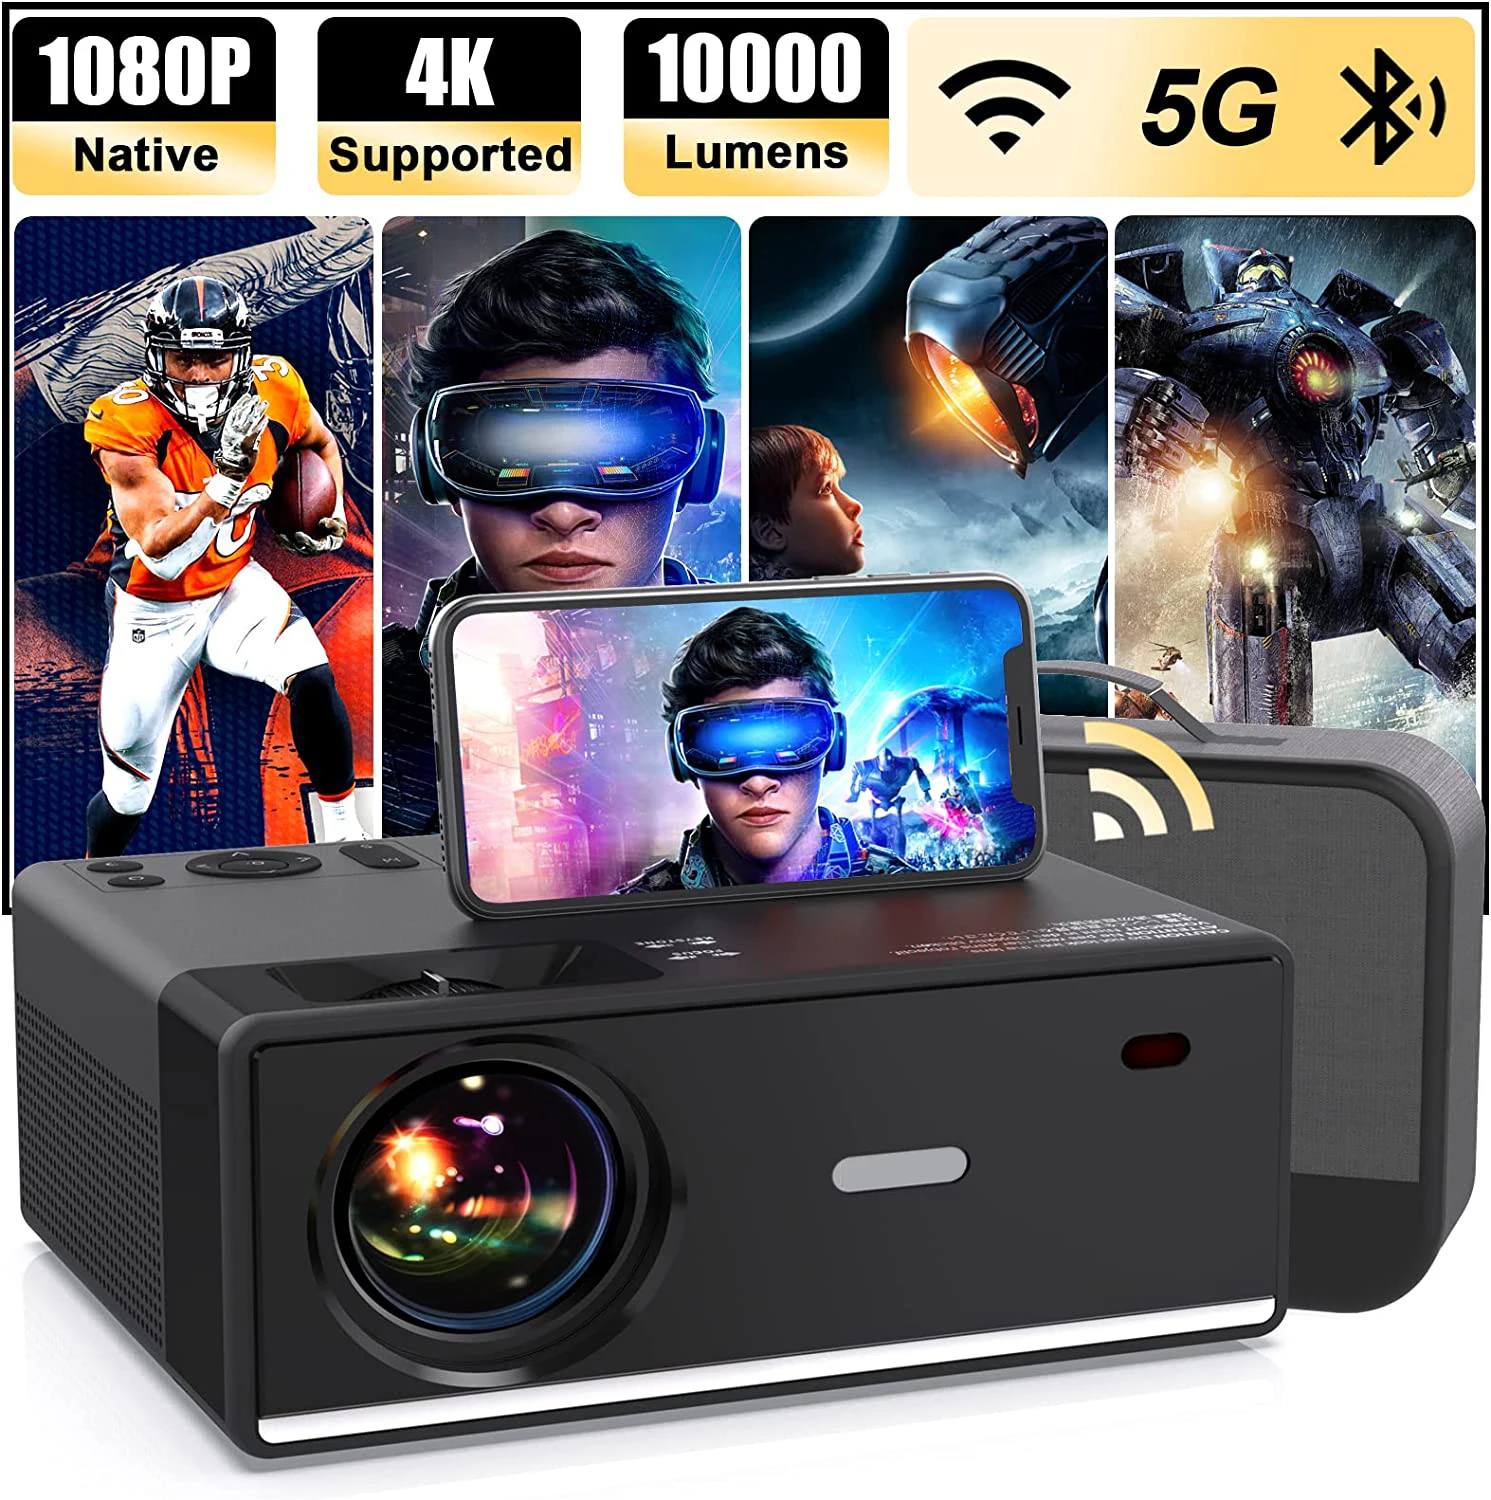 Projector Smart Tv 1080p Projector Native 10000 Lumens Led Home Cinema Beamer Projector For Android Phone 